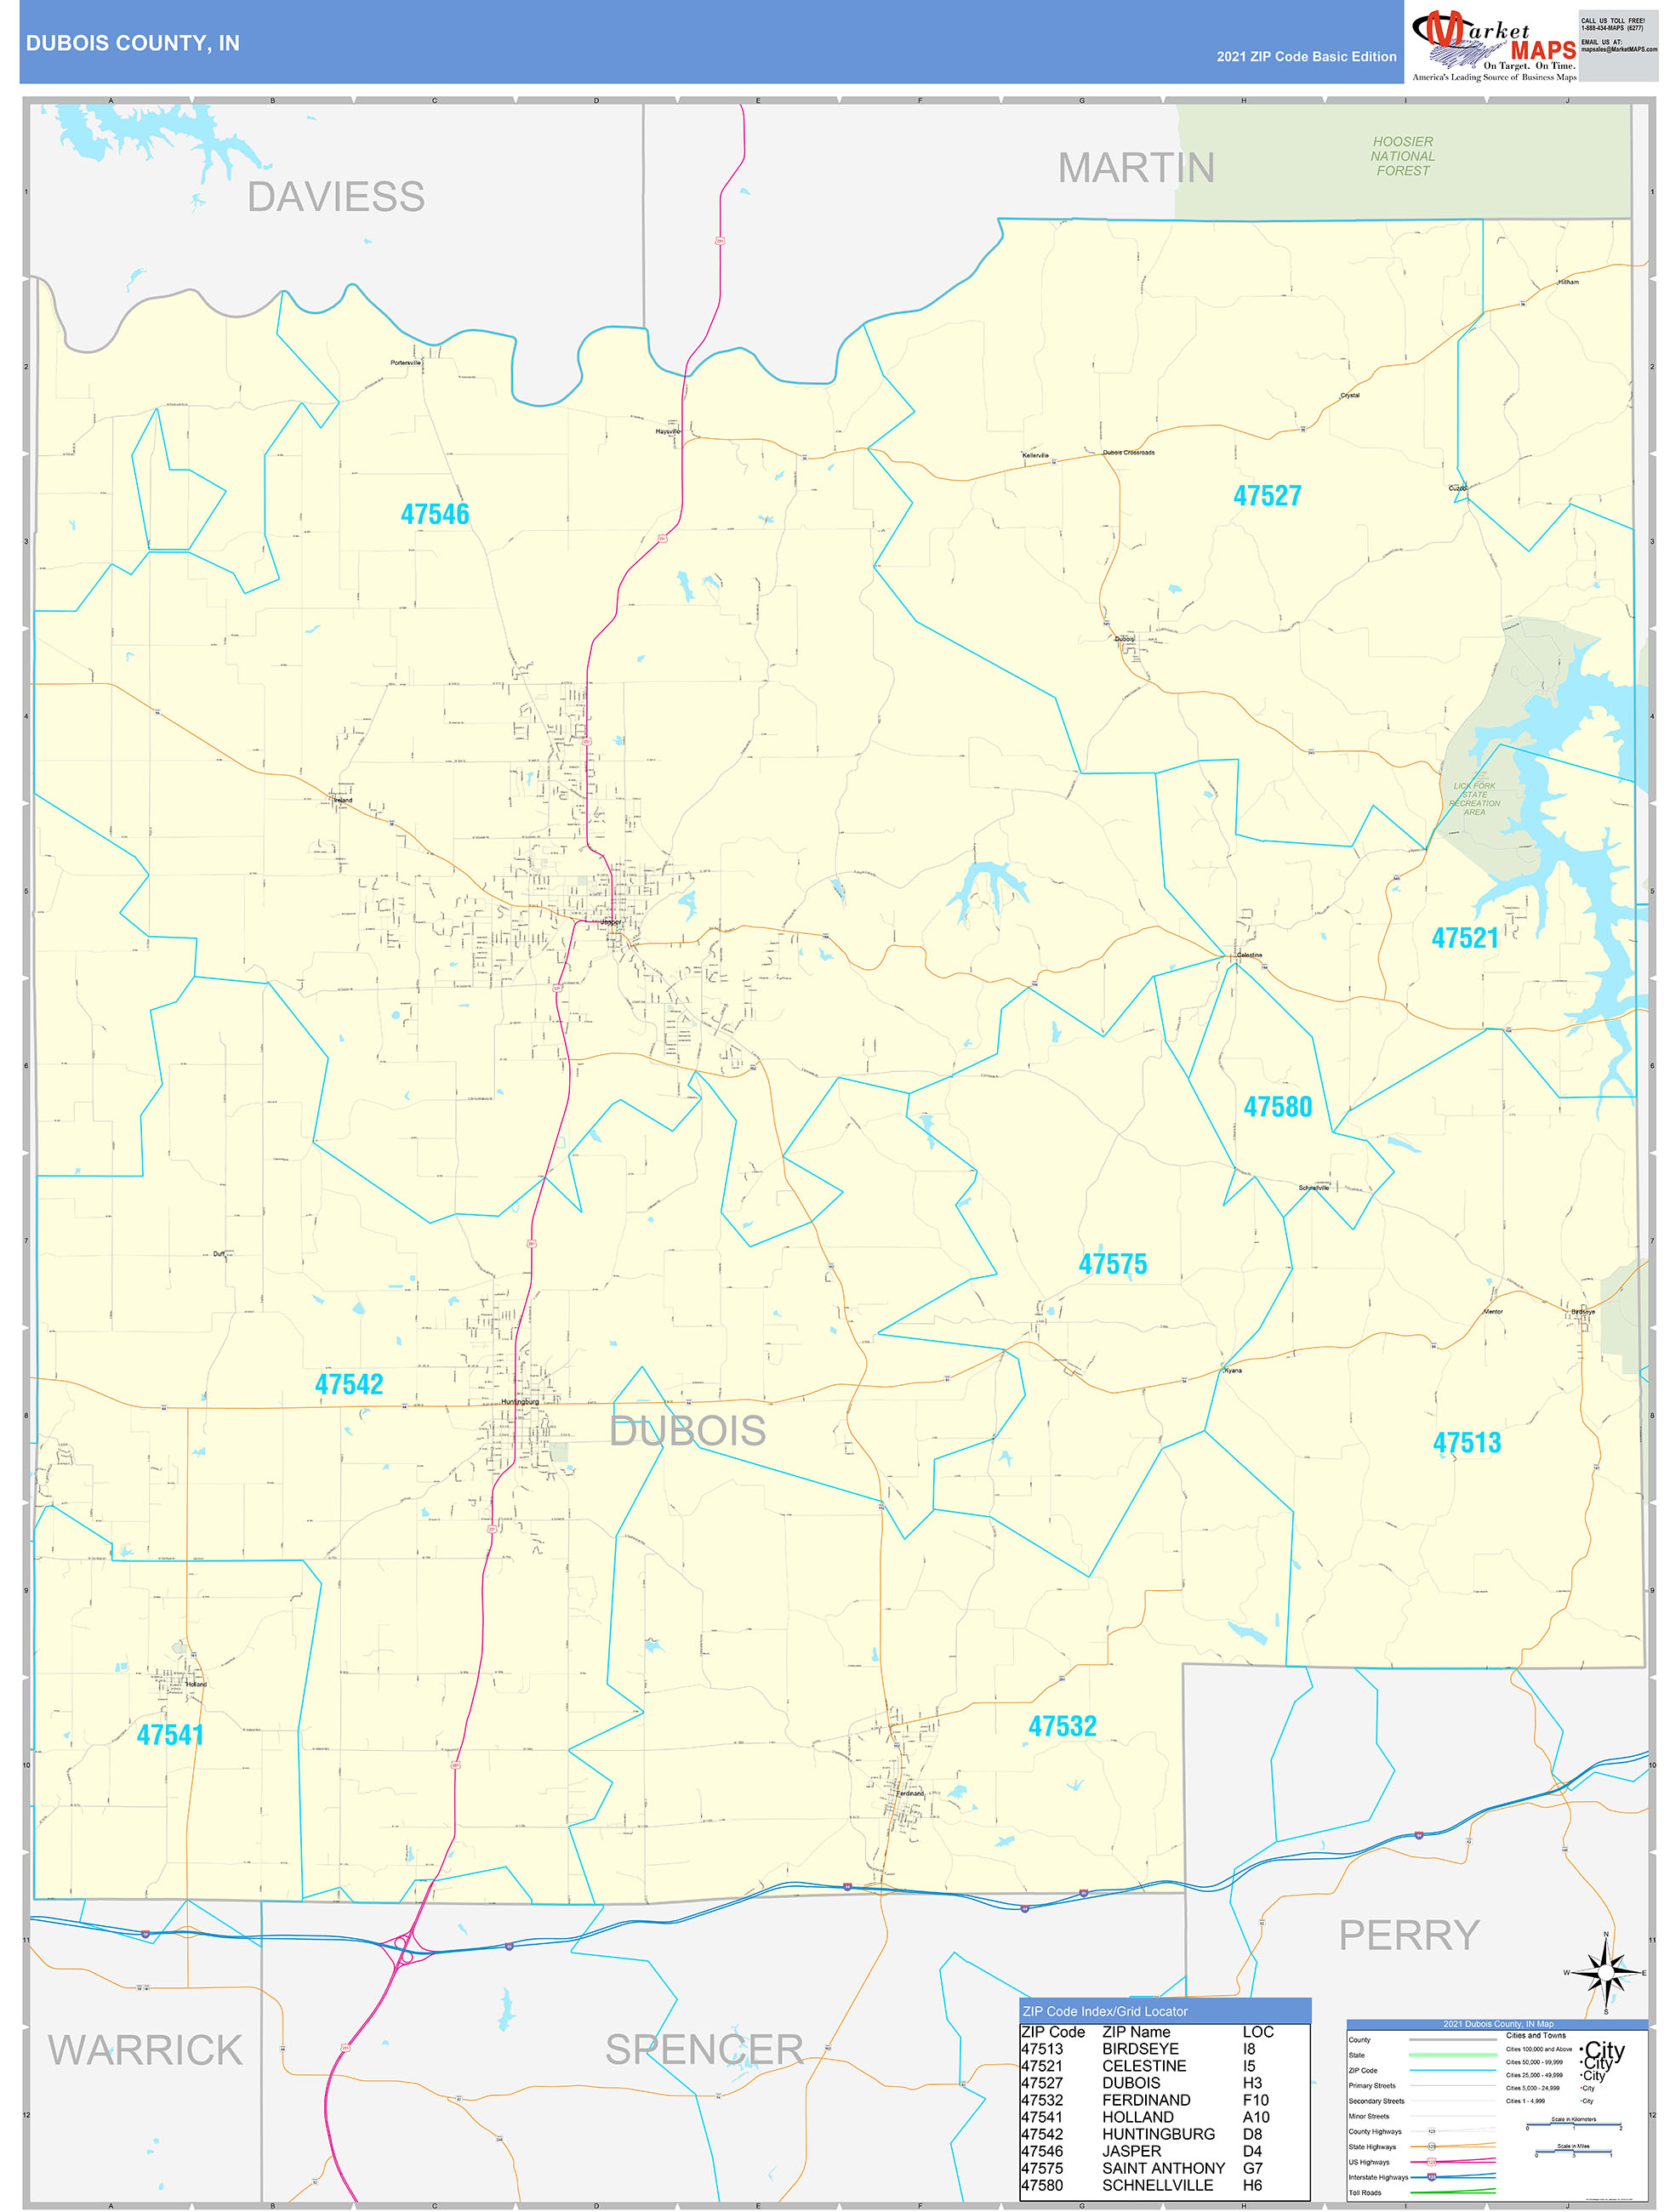 Dubois County, IN Zip Code Wall Map Basic Style by MarketMAPS